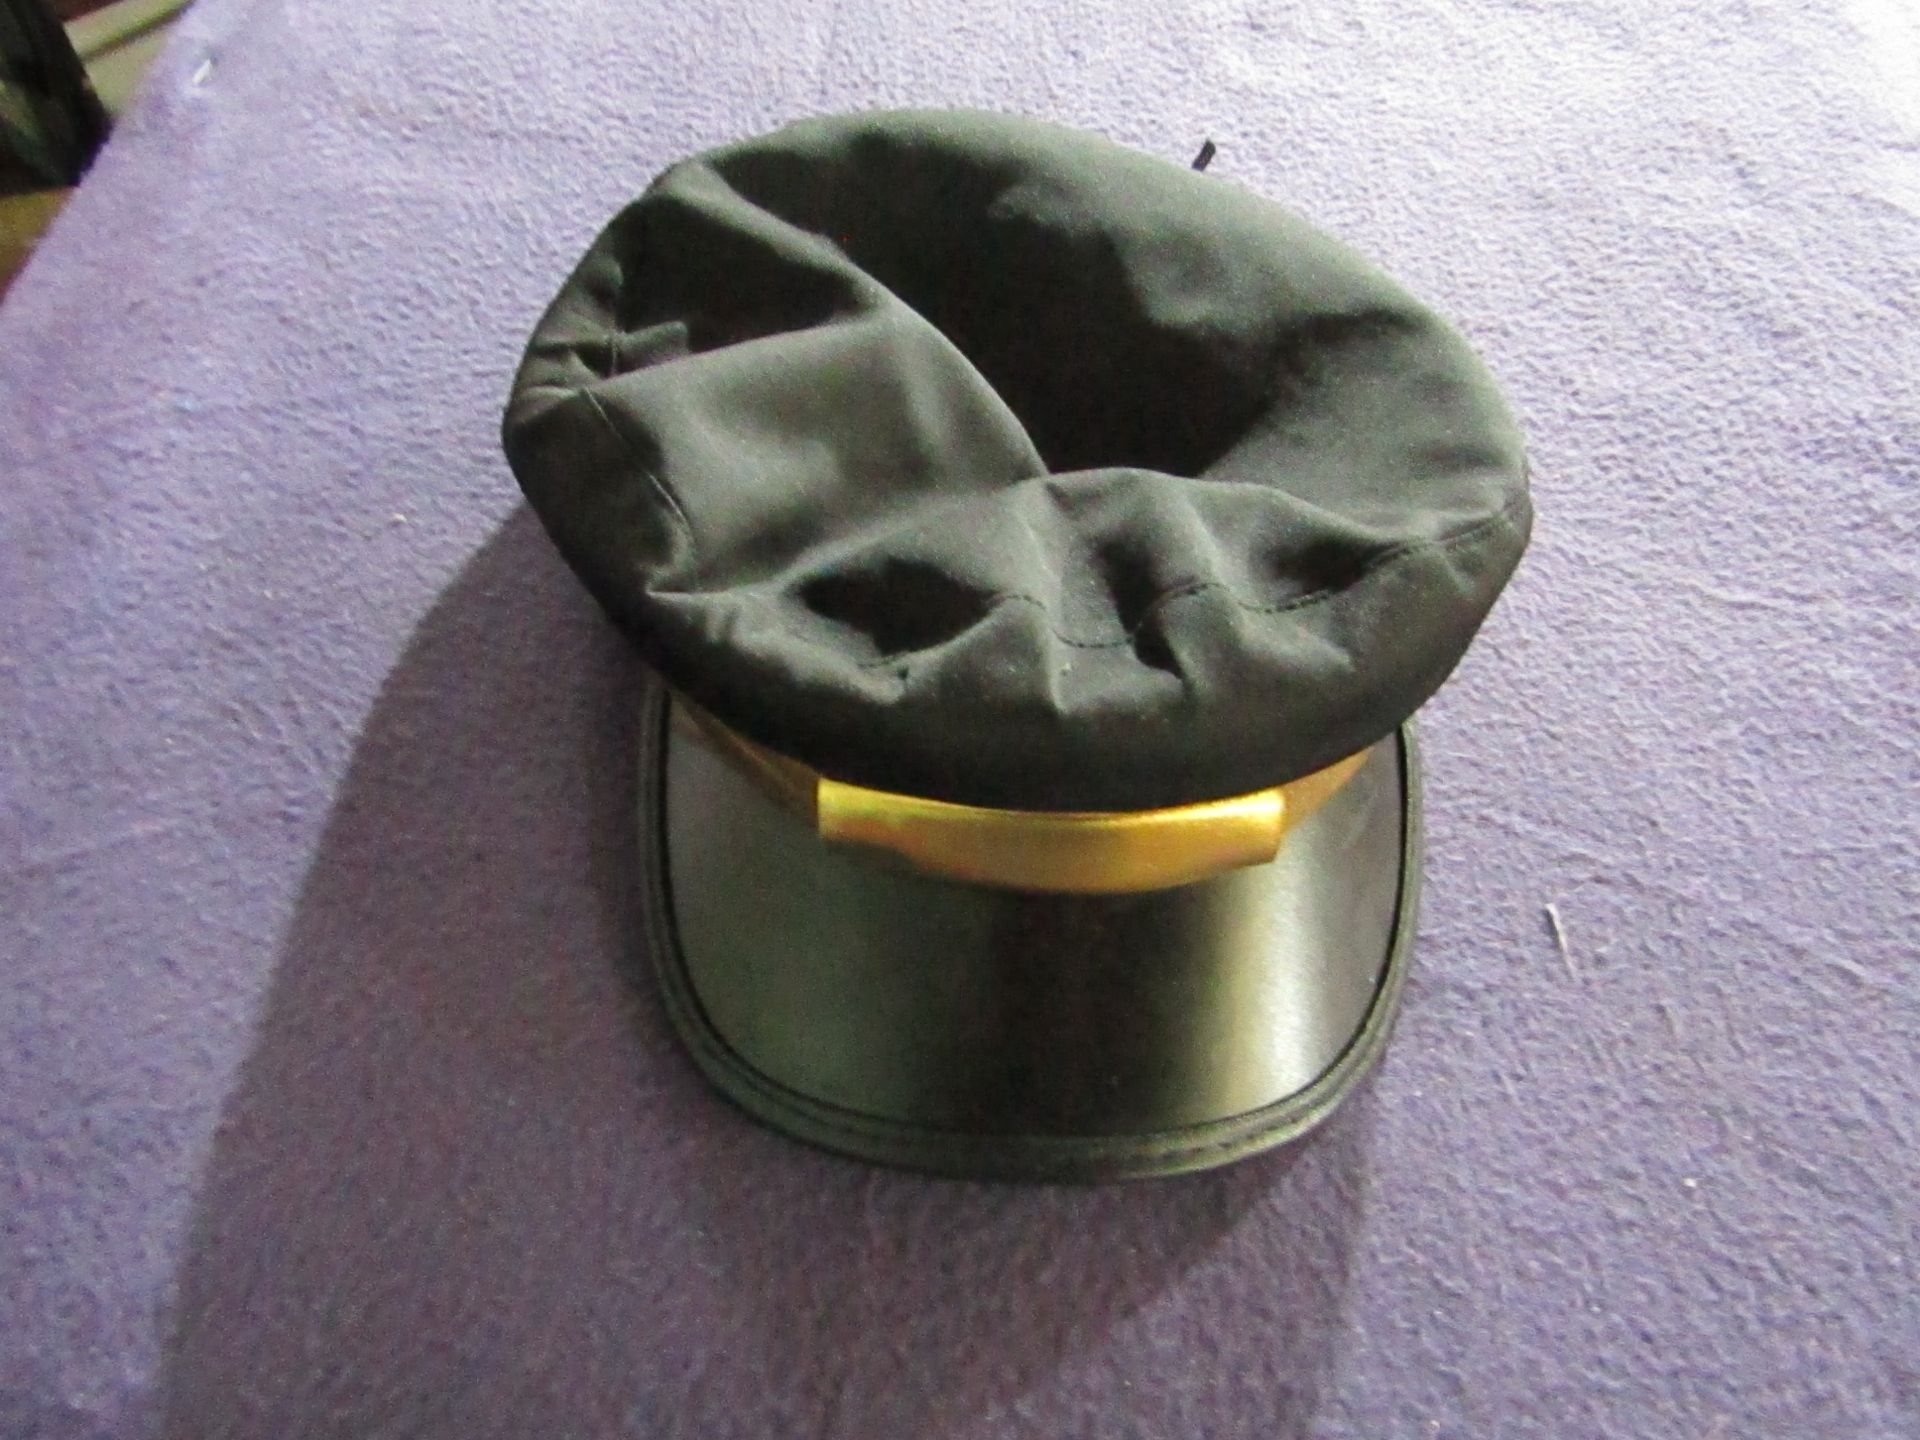 Black Hat With Gold Trim - Non Original Packaging.